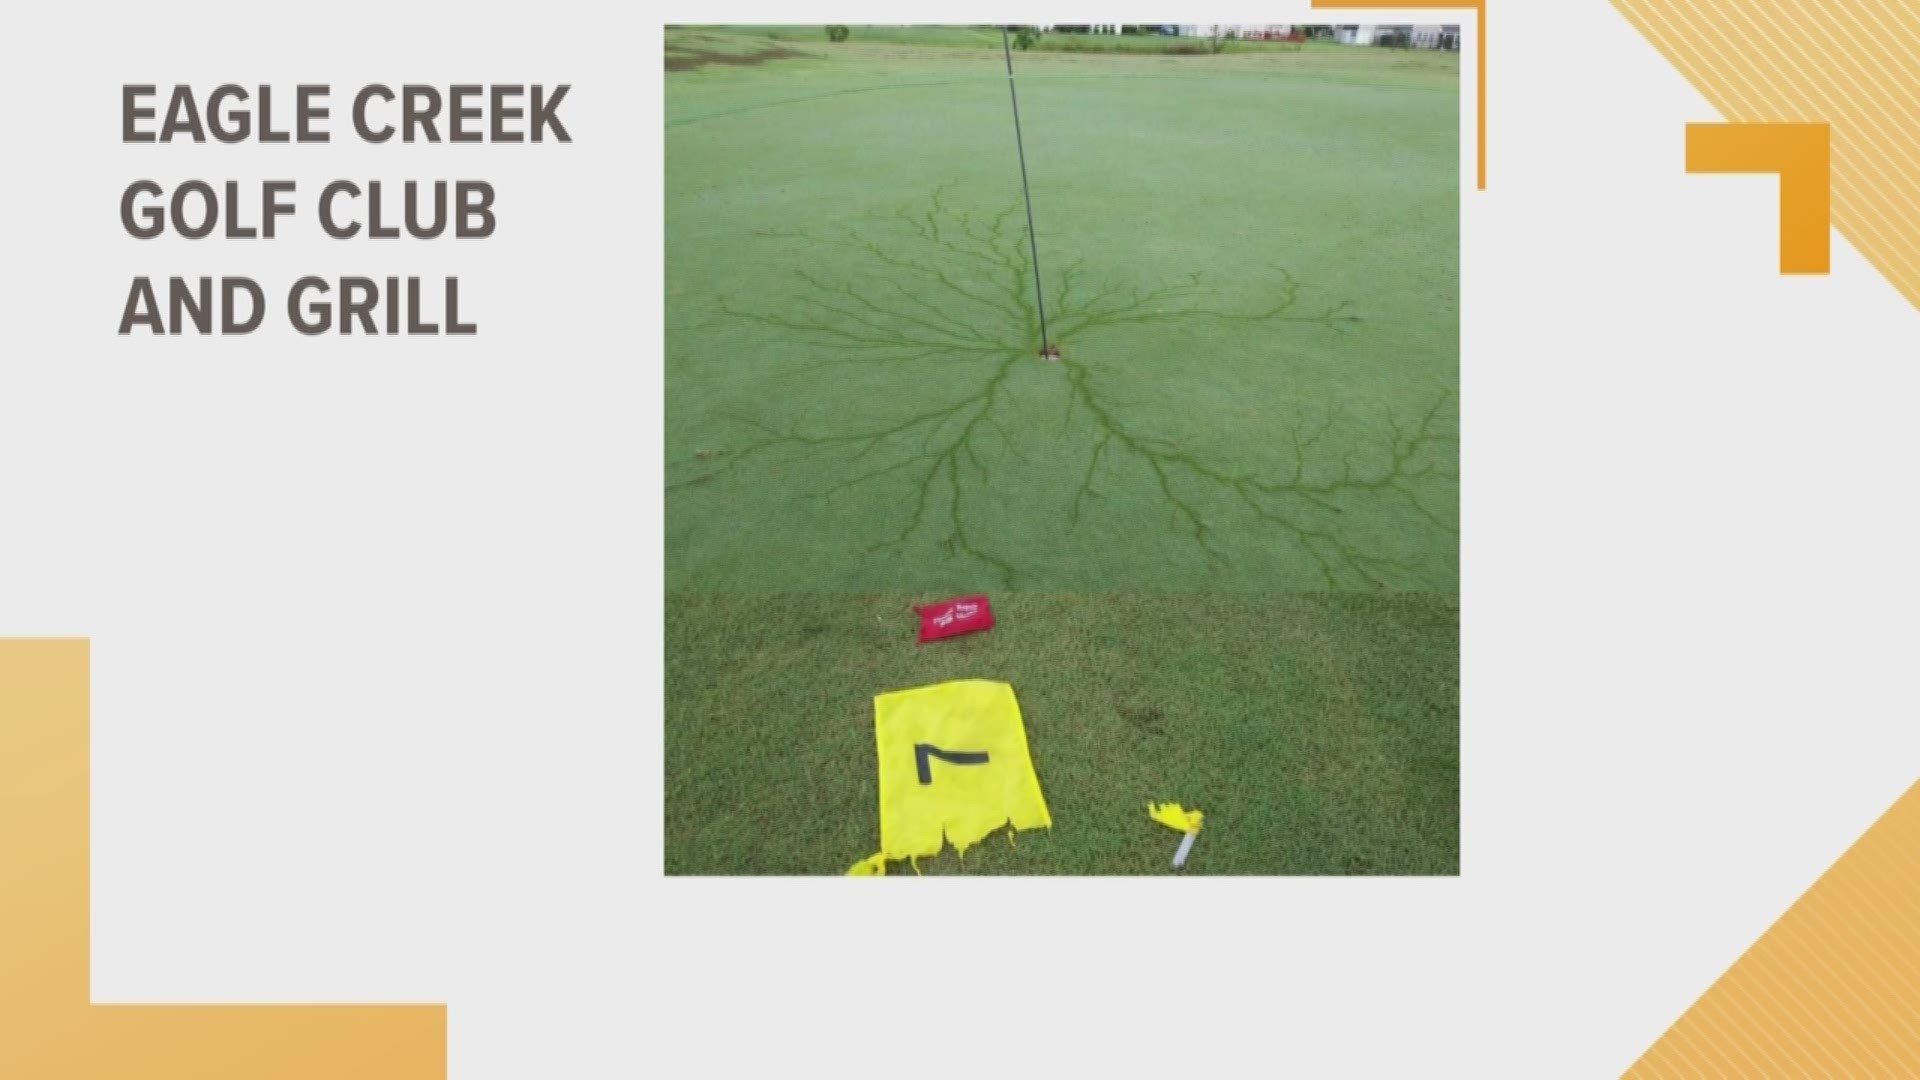 Wow! Lightning struck a hole on the Eagle Creek Golf Course in Moyock, N.C. this week.